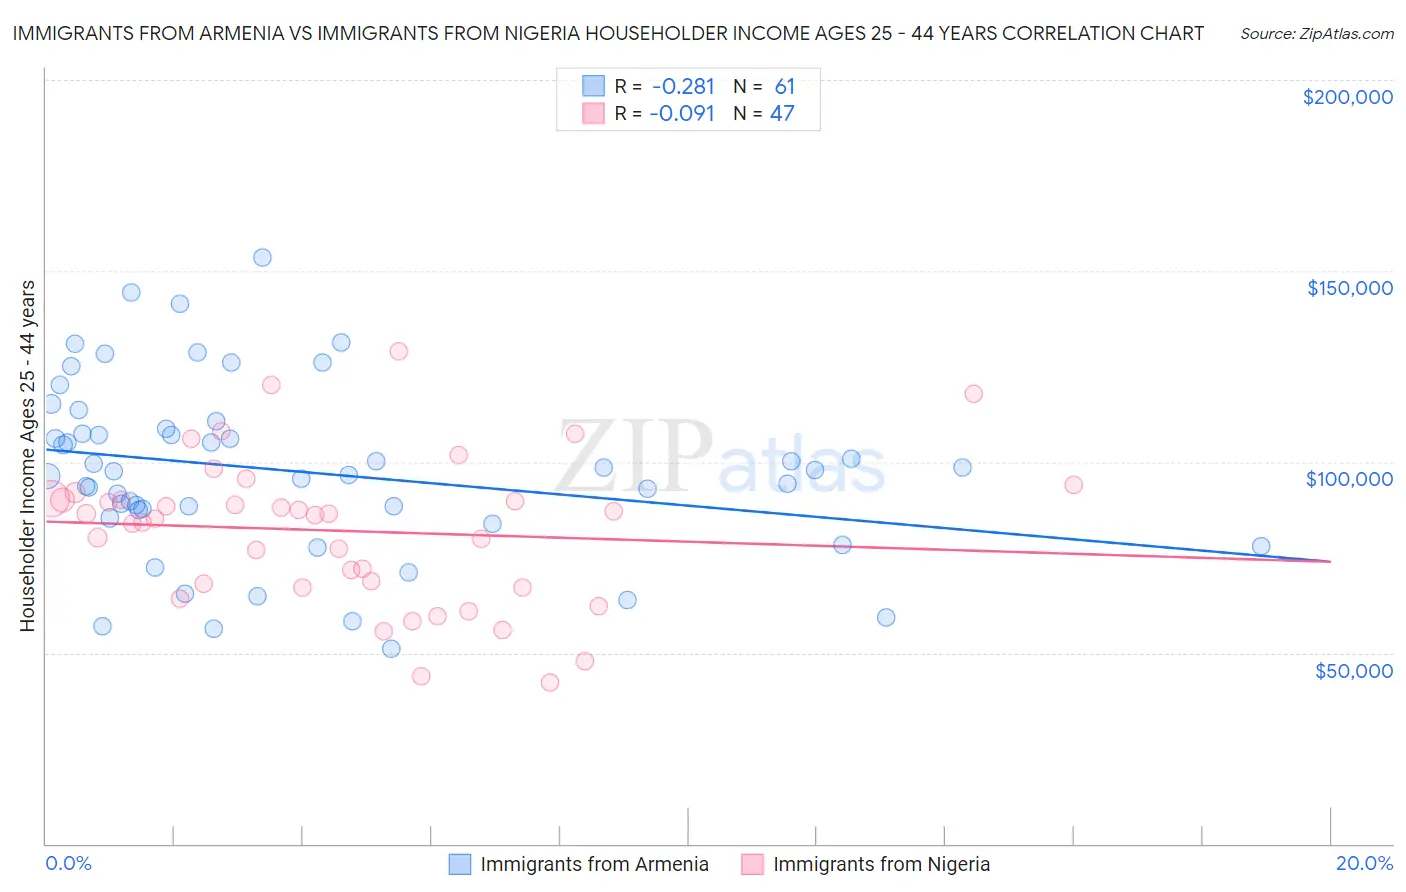 Immigrants from Armenia vs Immigrants from Nigeria Householder Income Ages 25 - 44 years